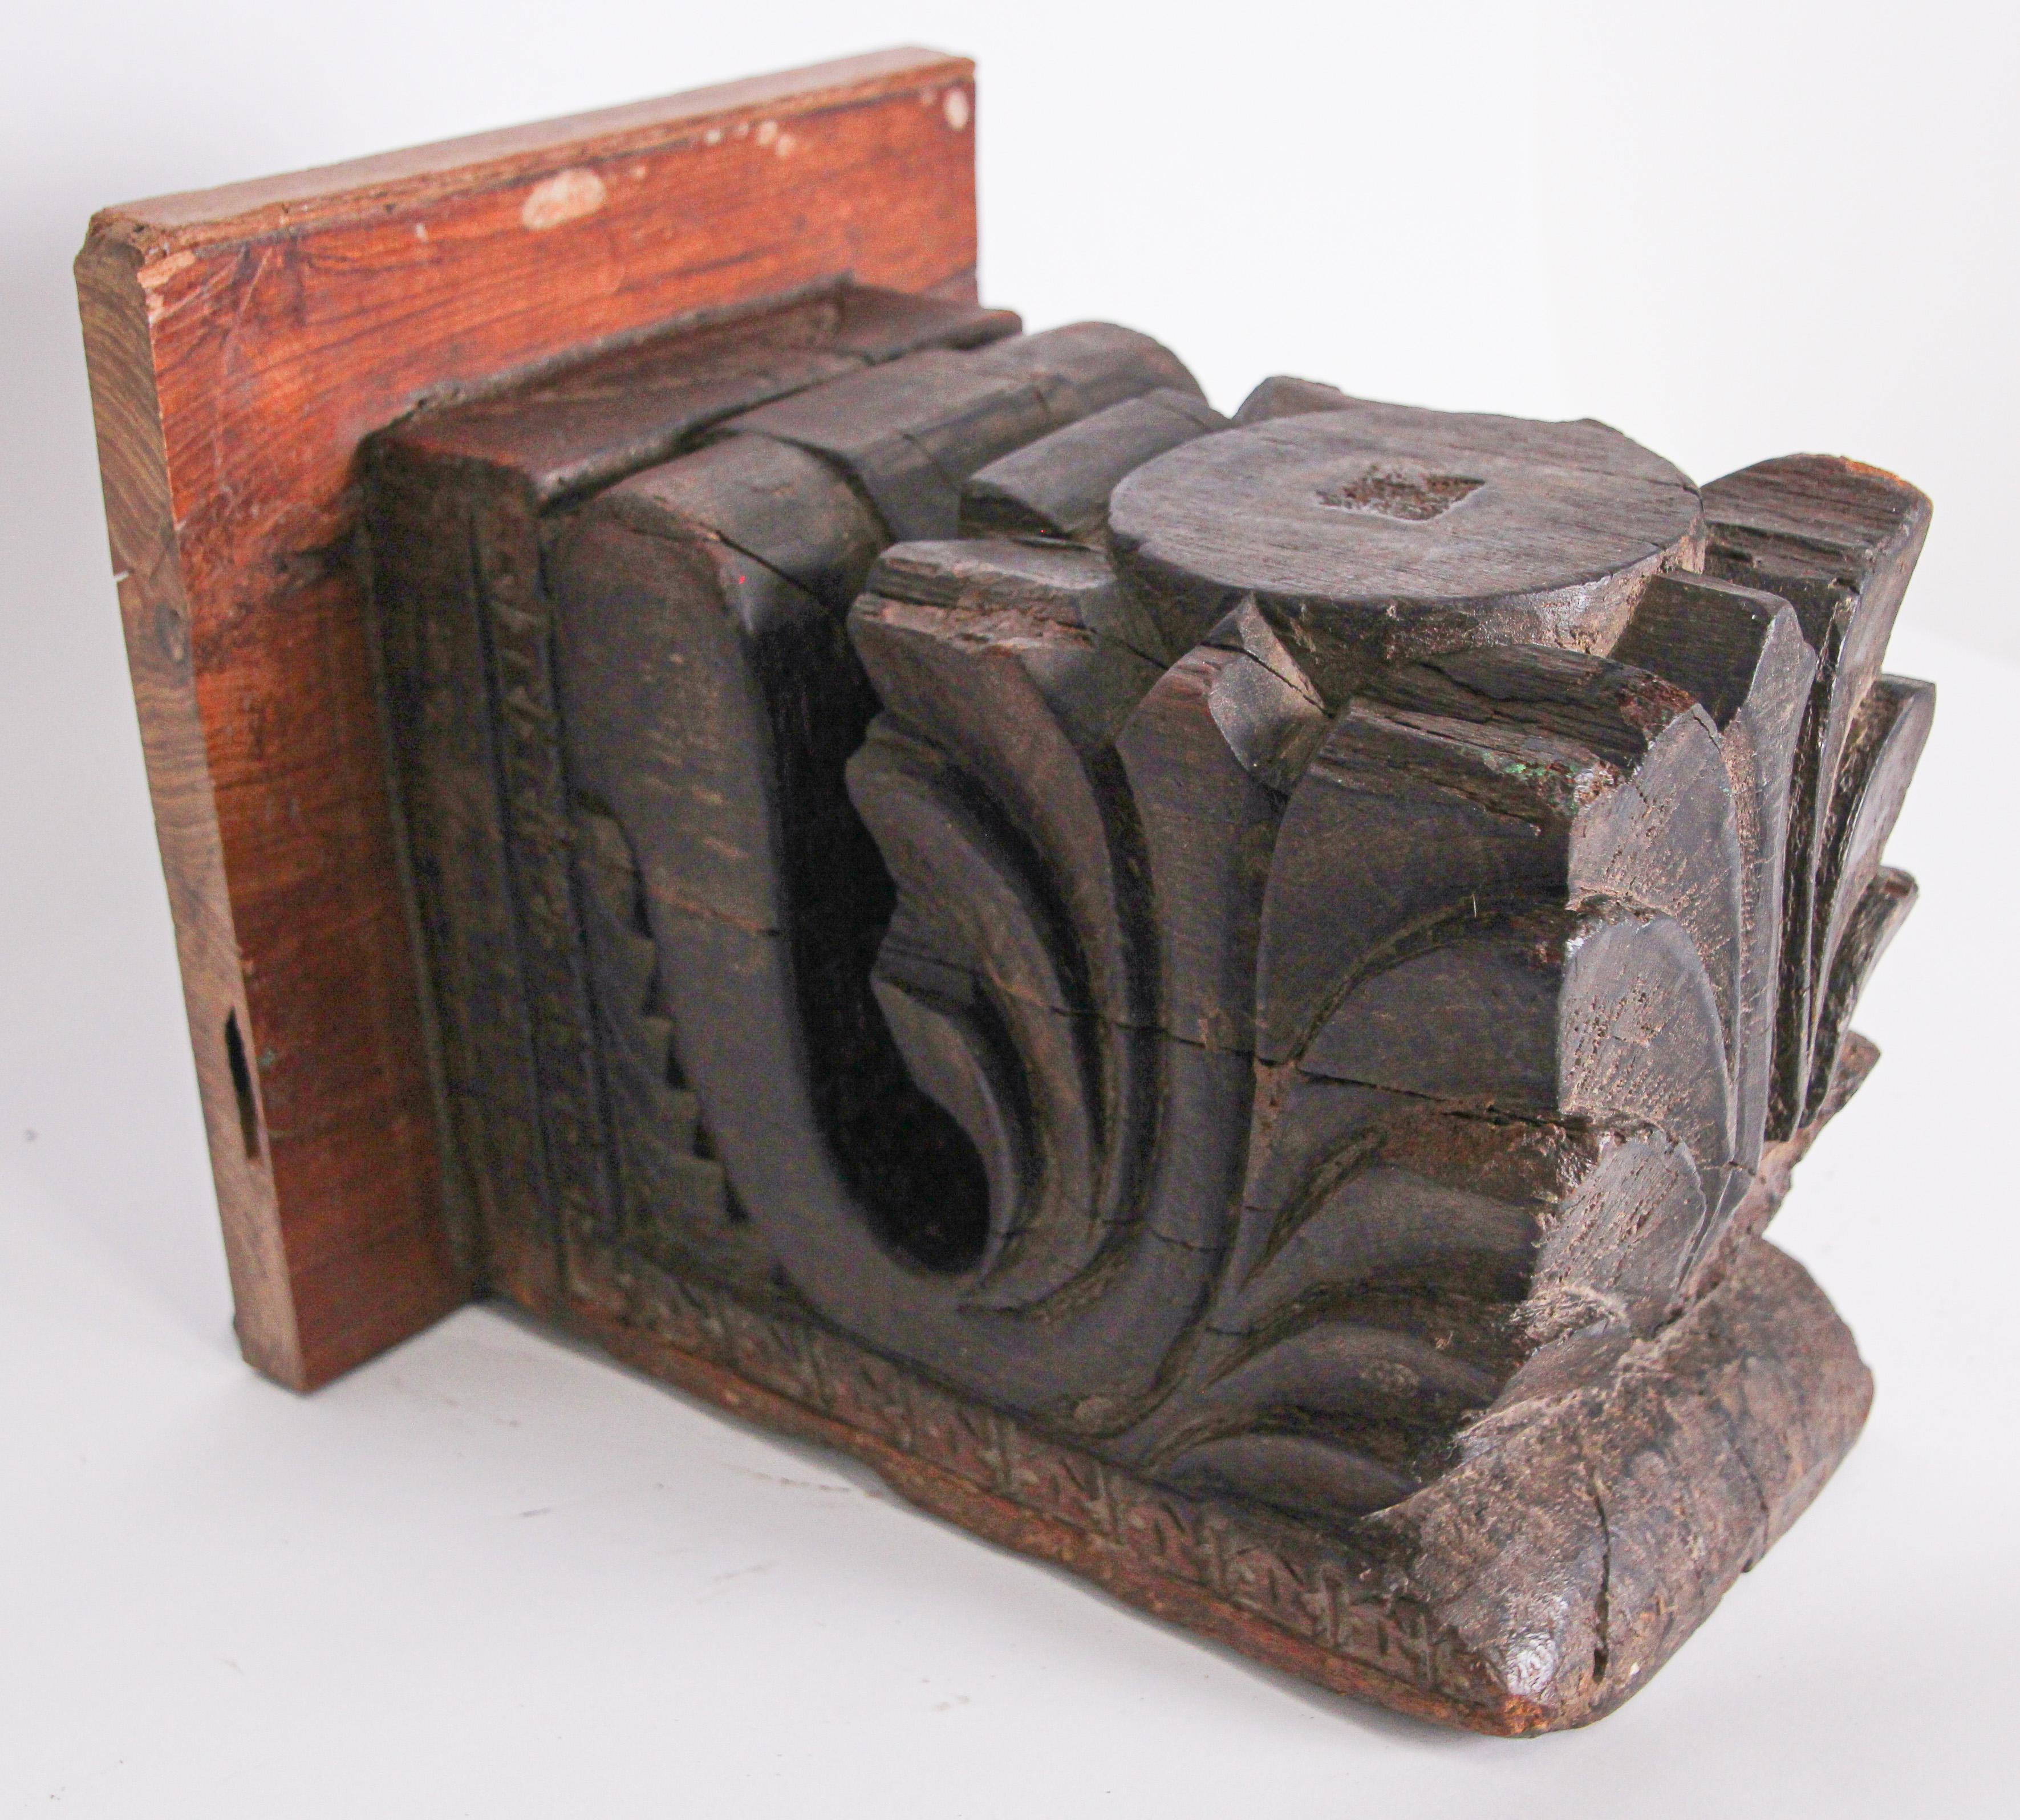 Antique architectural carved wood temple fragment from Rajasthan, India.
 
Made into a wall bracket stand.
 
19th century Hindu temple fragment. This antique fragment were elements of a section of hand carved wood frieze, within a temple in India.